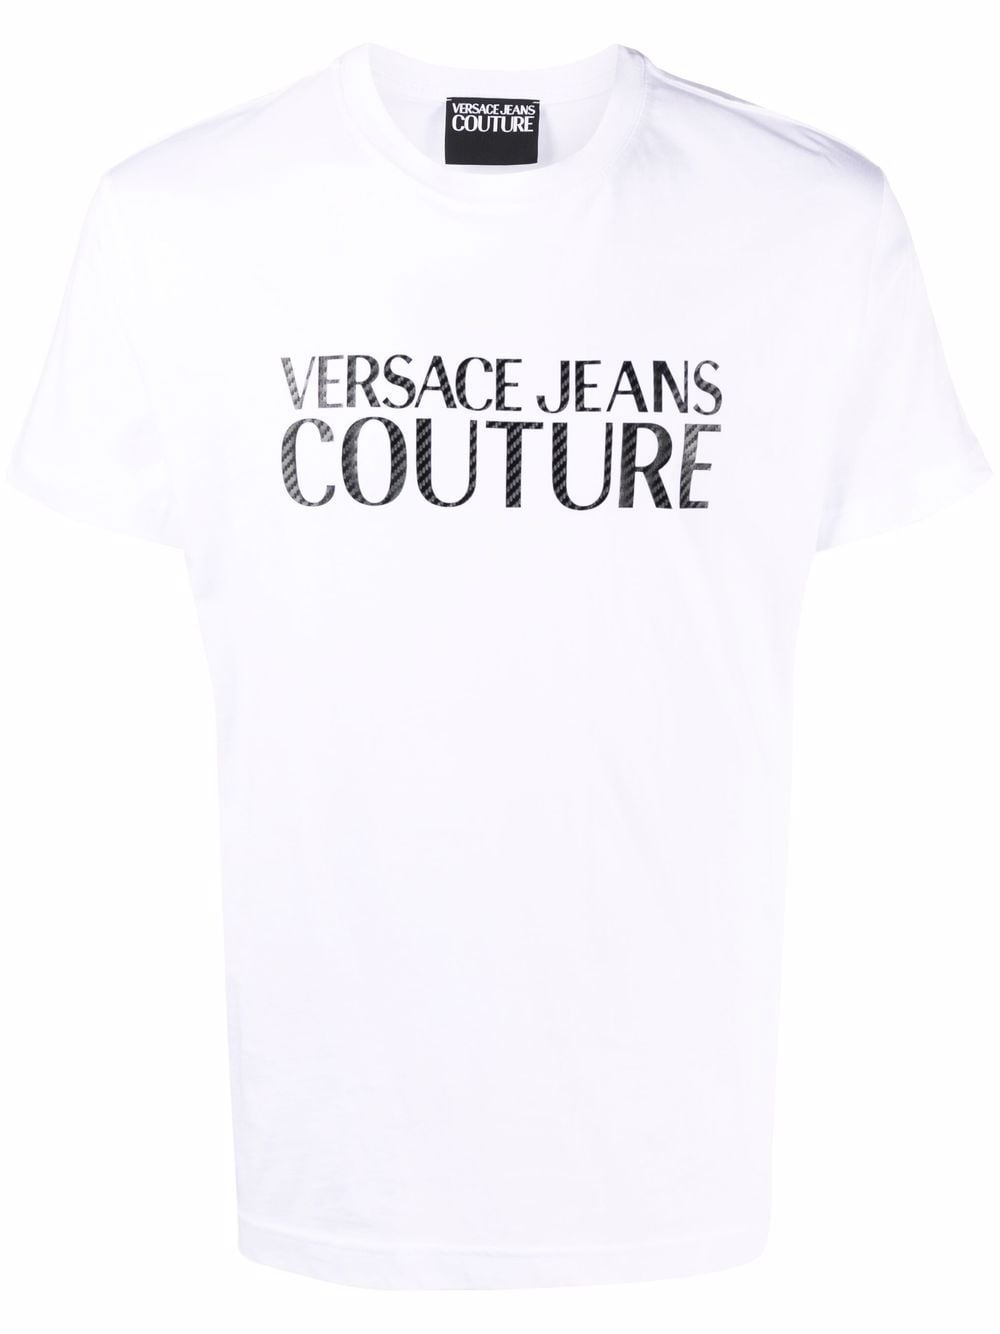 Versace Jeans Couture logo print T-shirt - White von Versace Jeans Couture